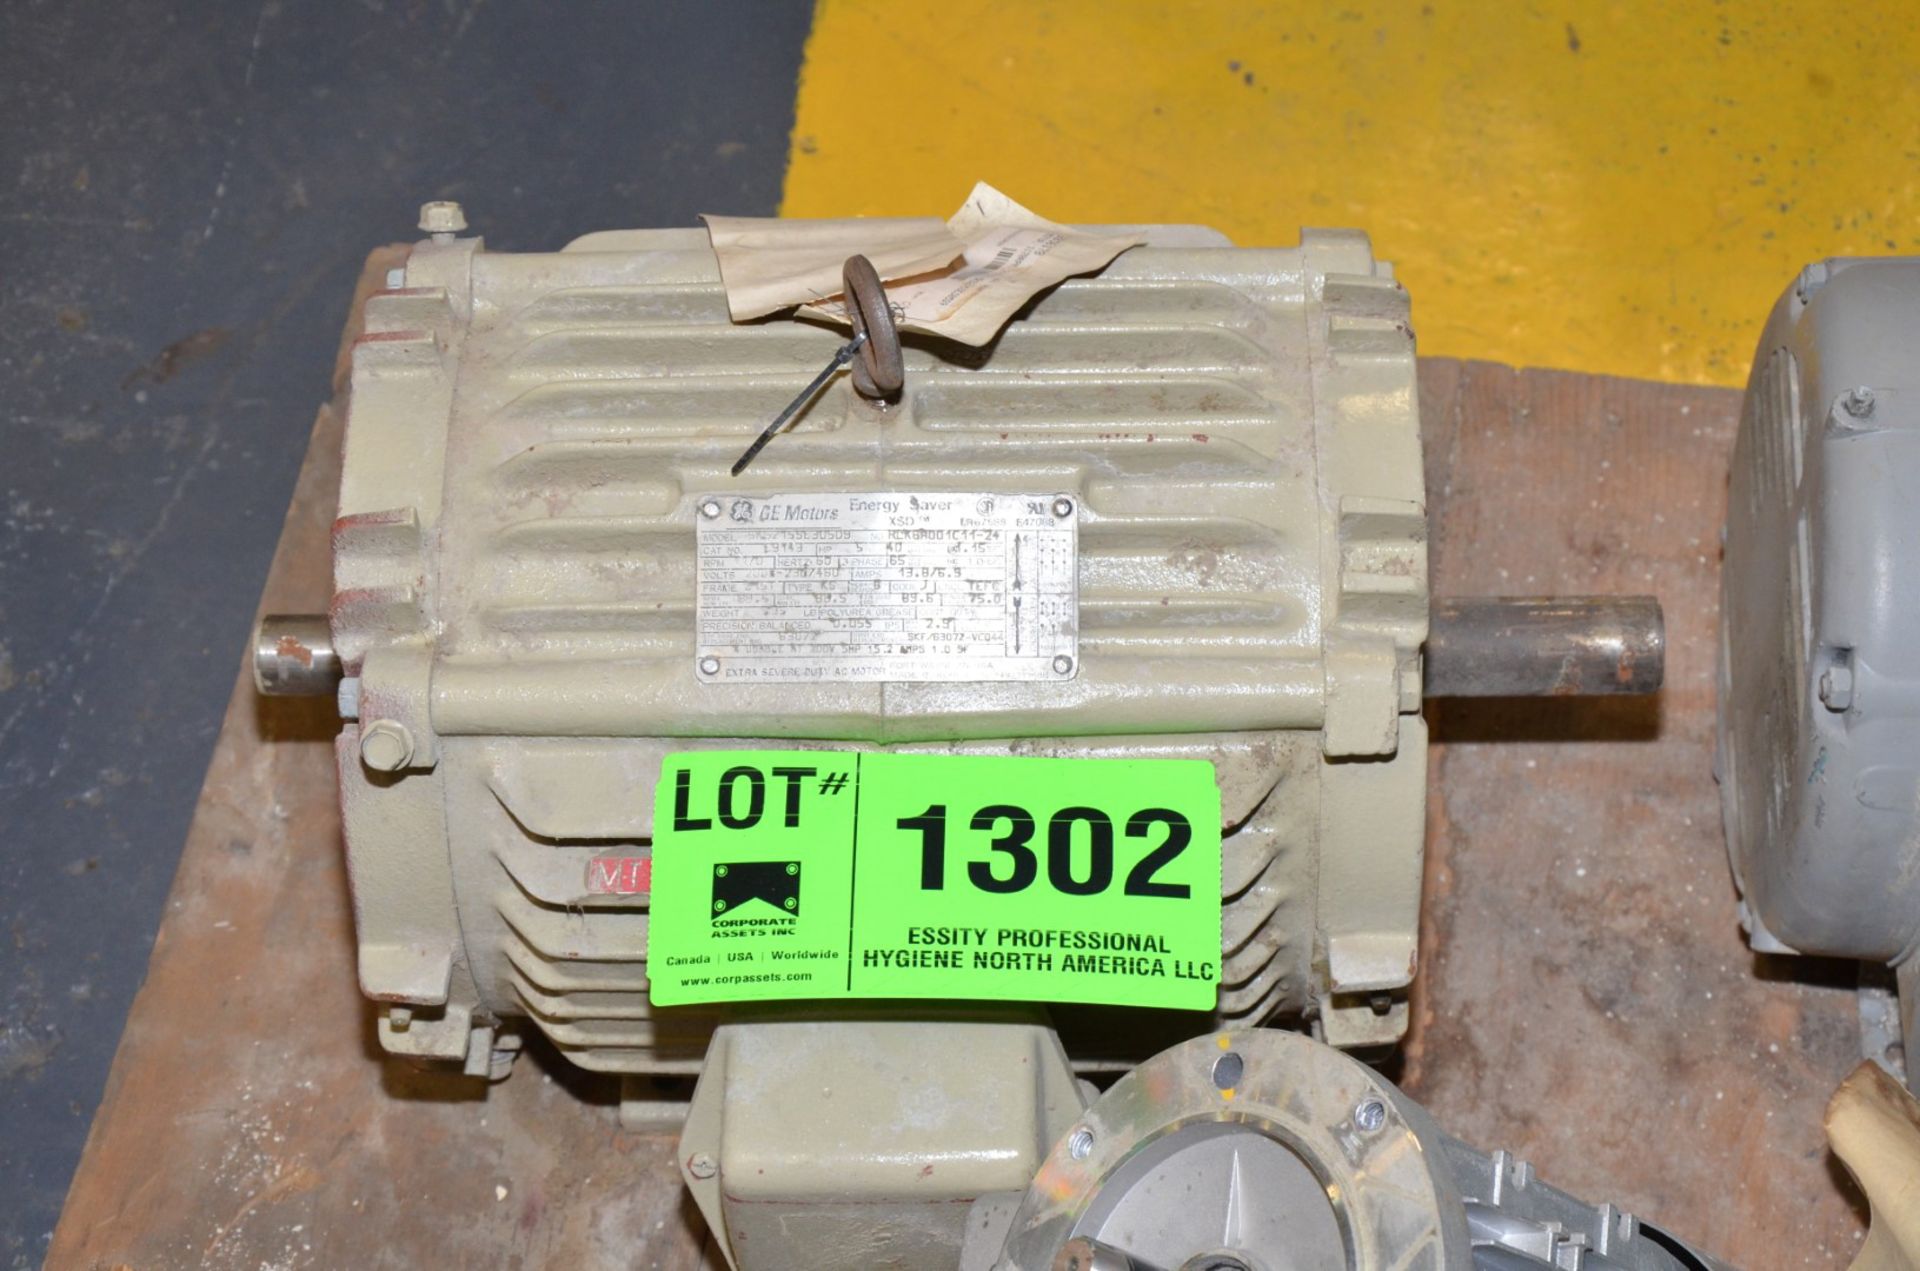 GE 5 HP 1170 RPM 460V ELECTRIC MOTOR [RIGGING FEE FOR LOT #1302 - $25 USD PLUS APPLICABLE TAXES]